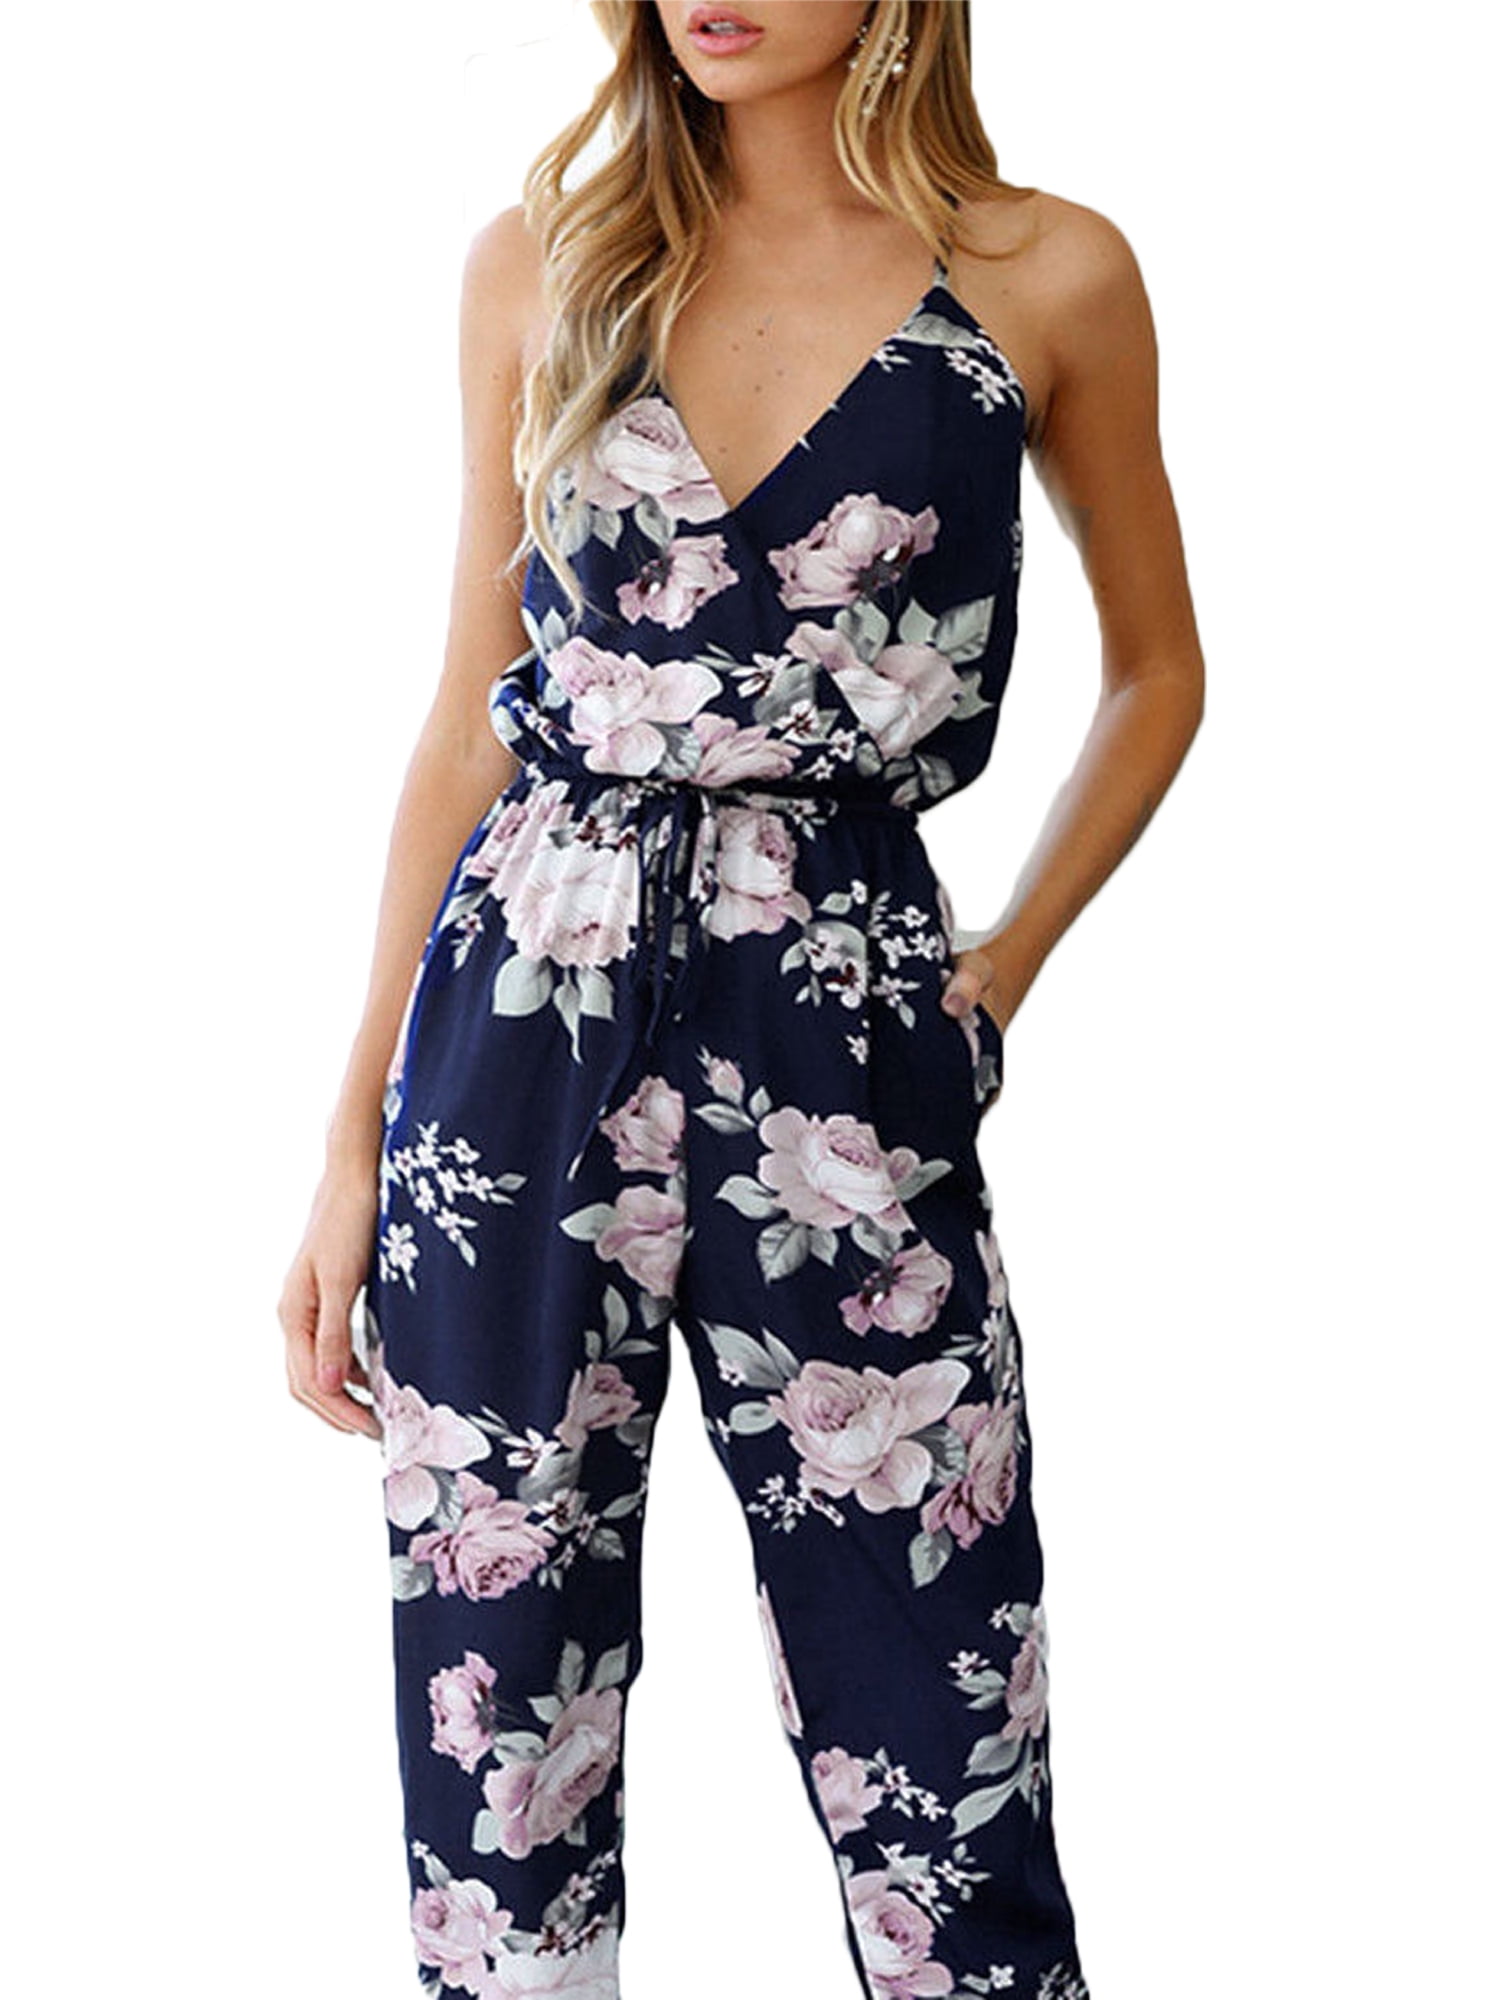 AELSON Womens Casual Spaghetti Strap Floral Print V-Neck Sleeveless Summer Beach Jumpsuits Rompers with Pockets 